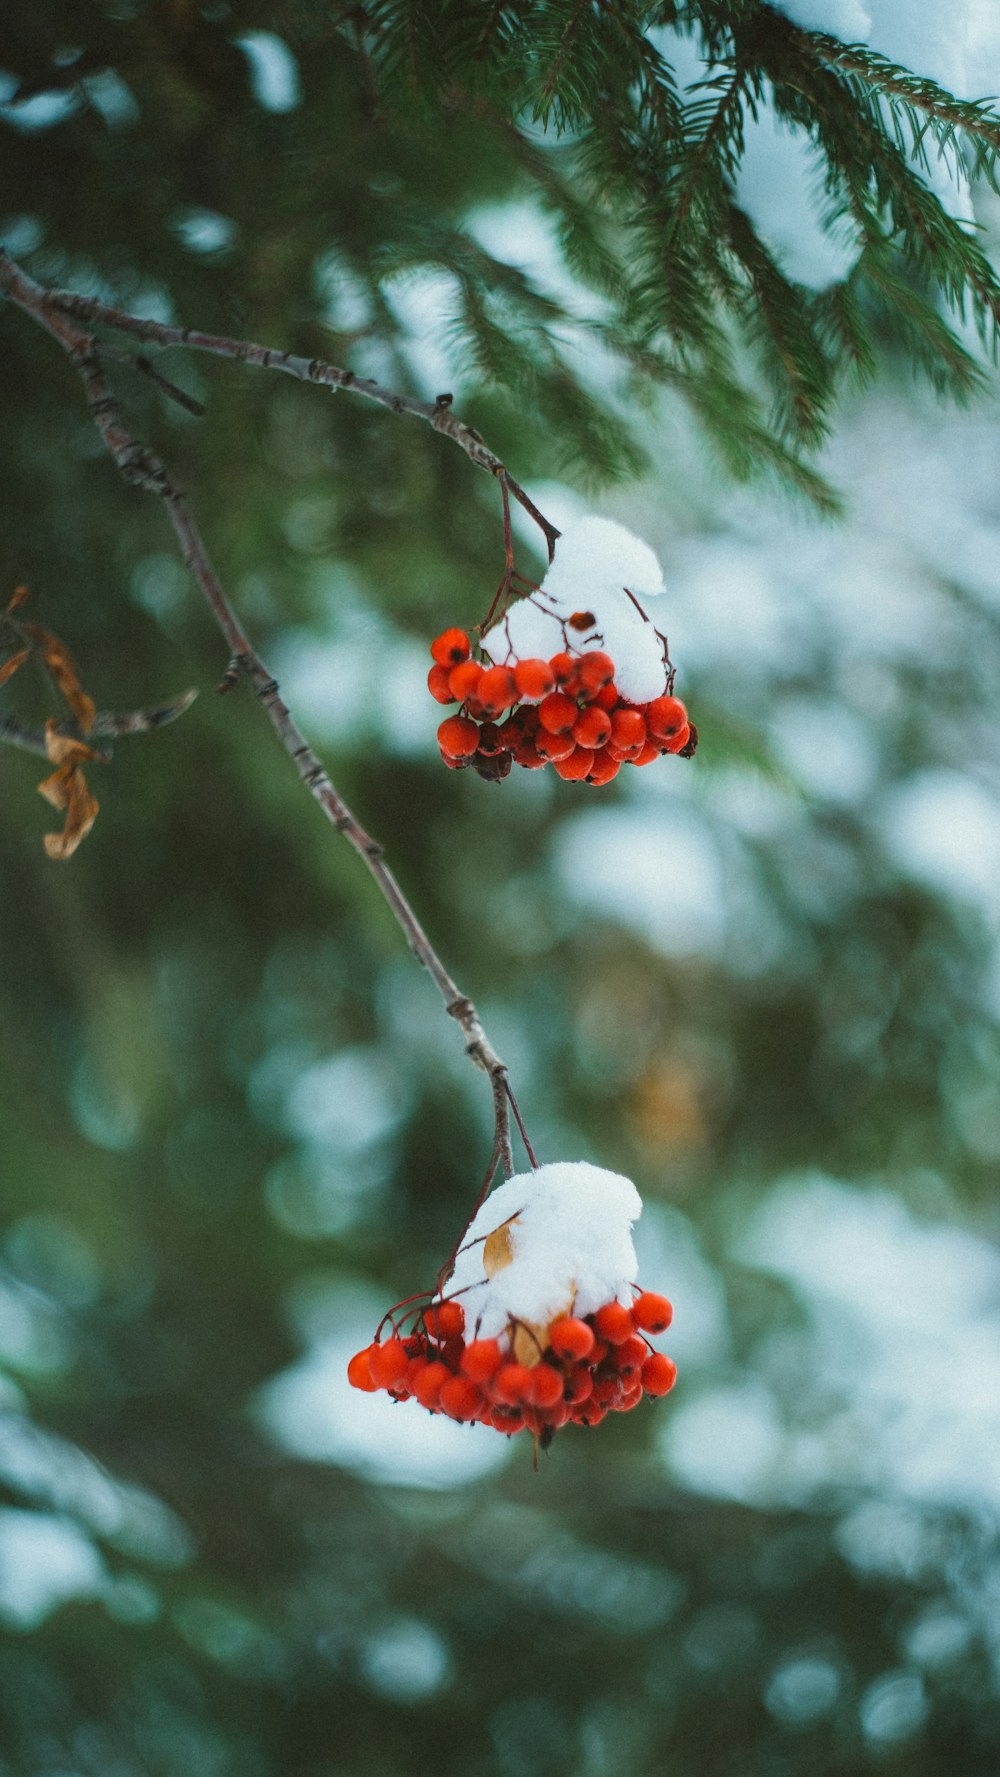 red round fruits on tree branch